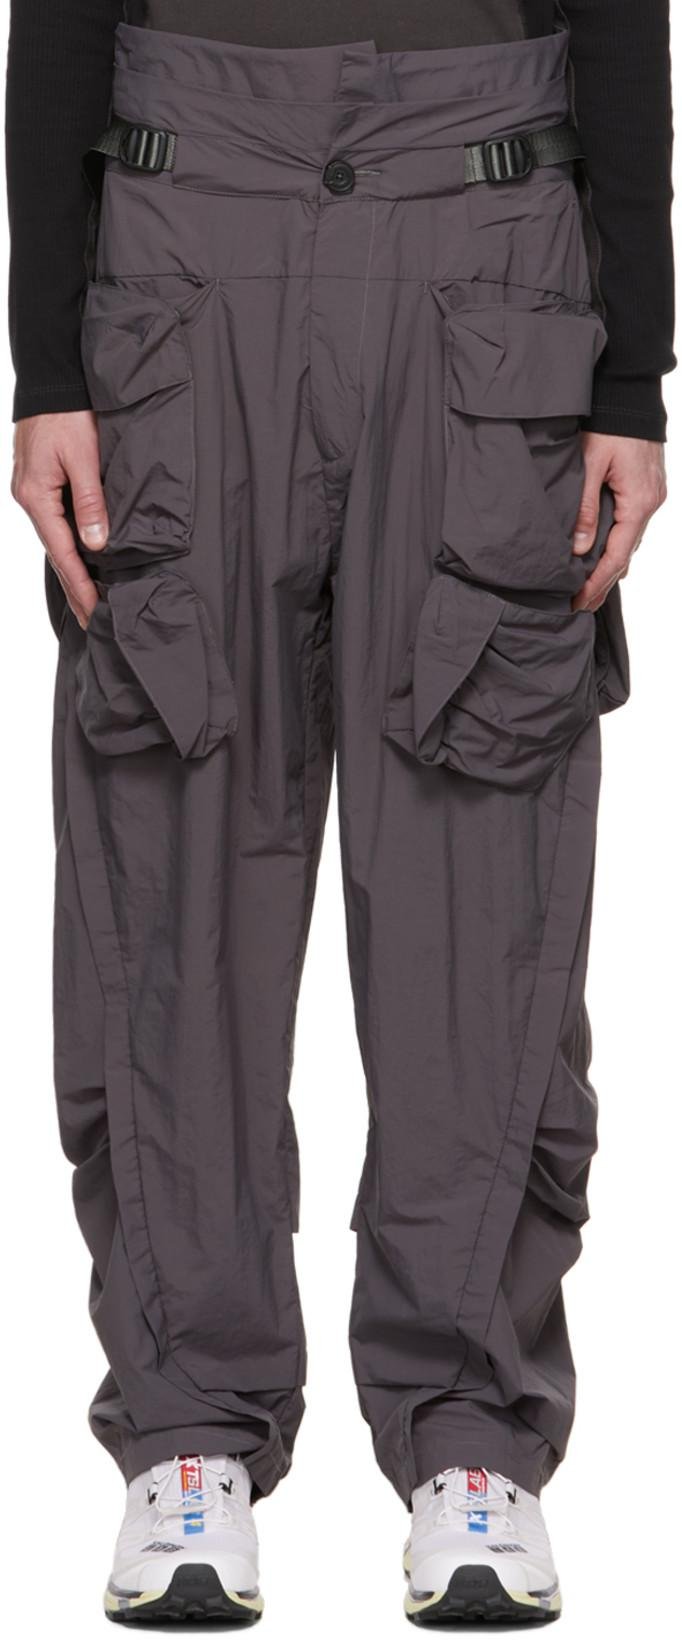 Gray Extended Waistband Cargo Pants by ARCHIVAL REINVENT